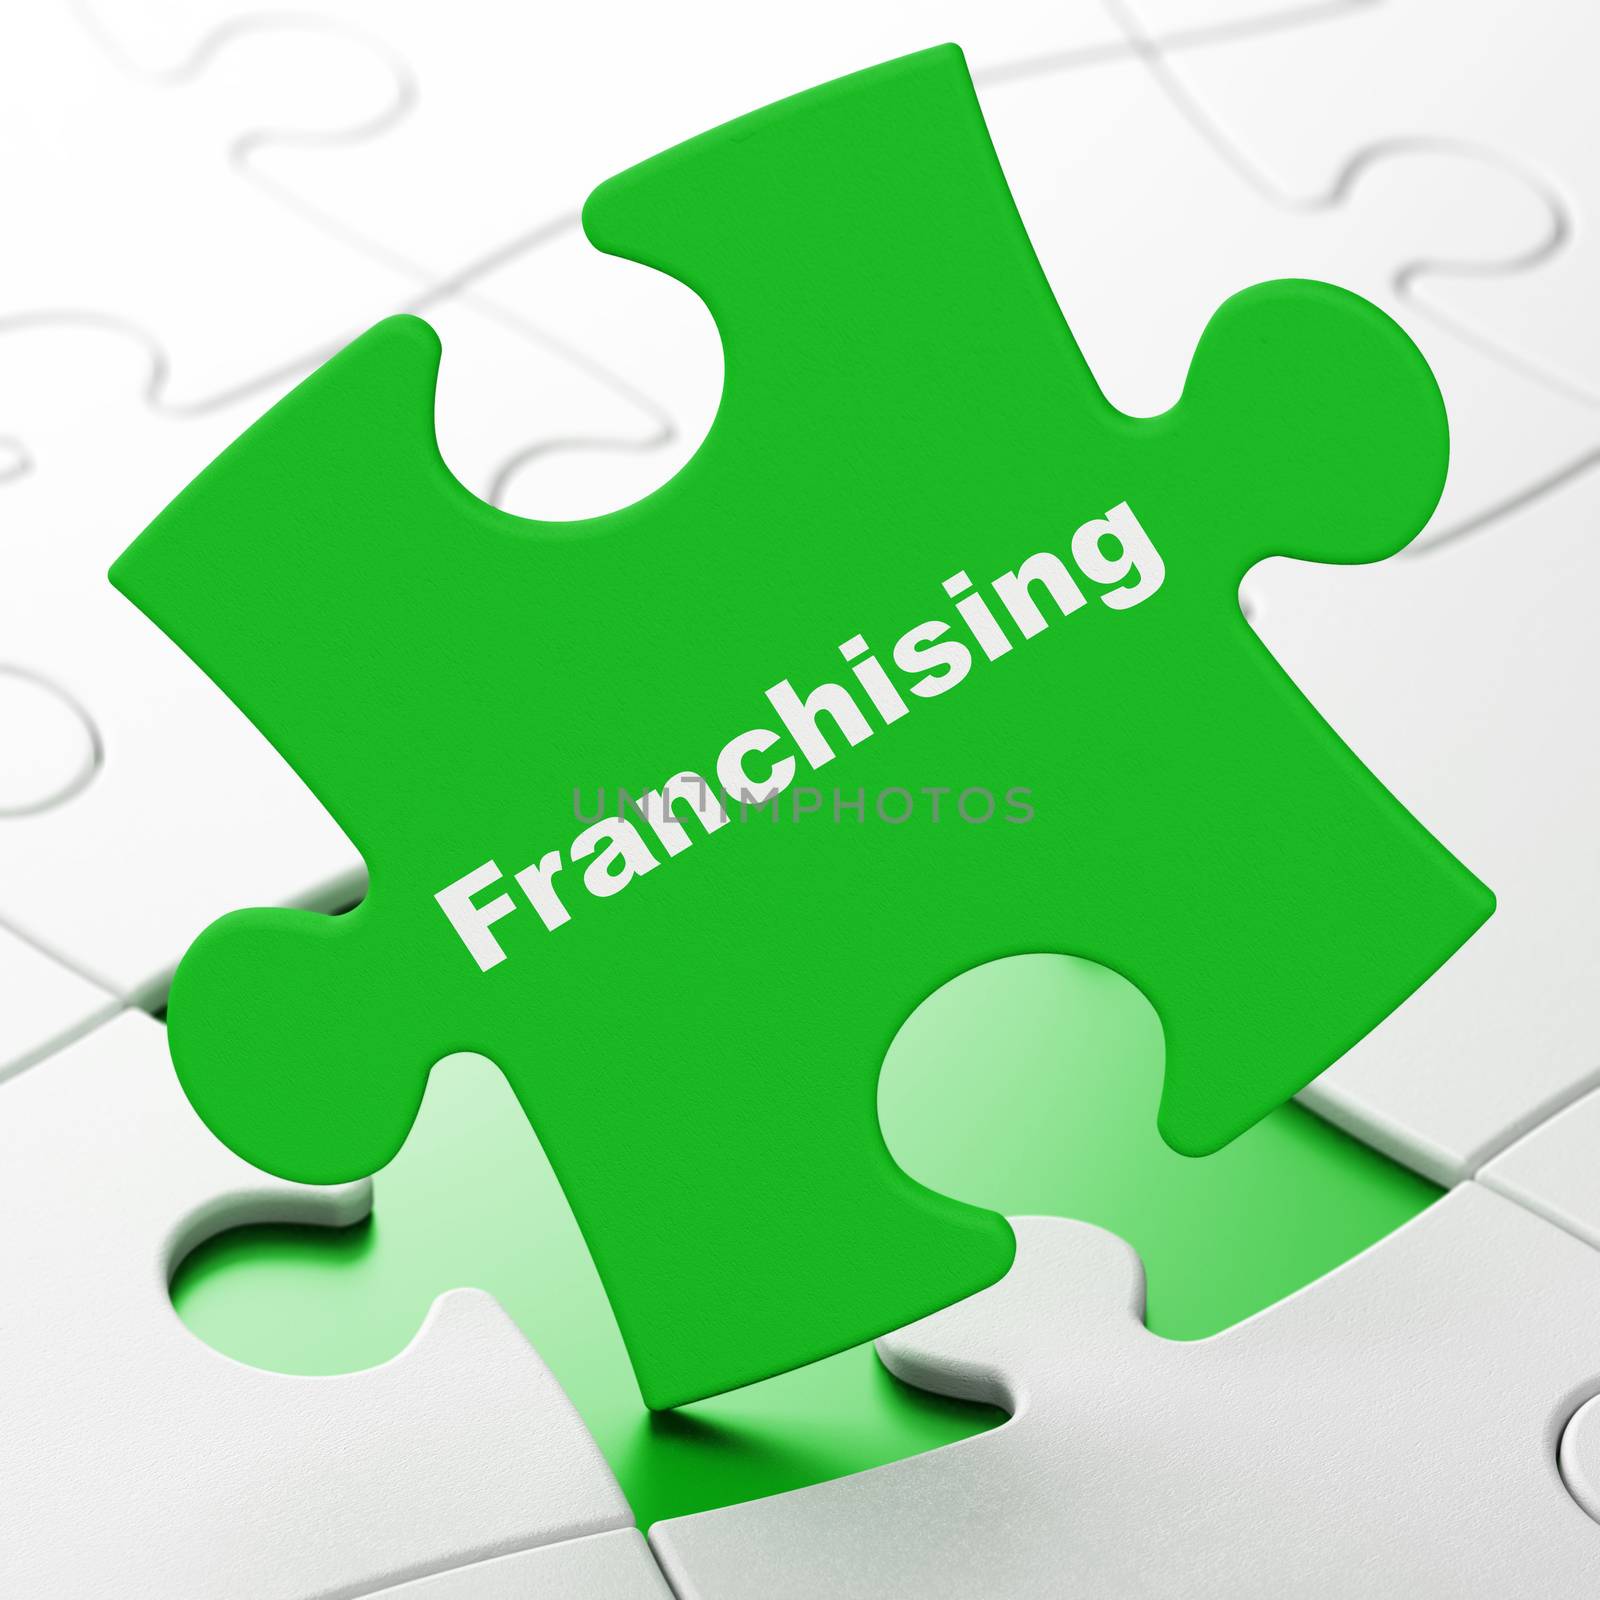 Business concept: Franchising on puzzle background by maxkabakov